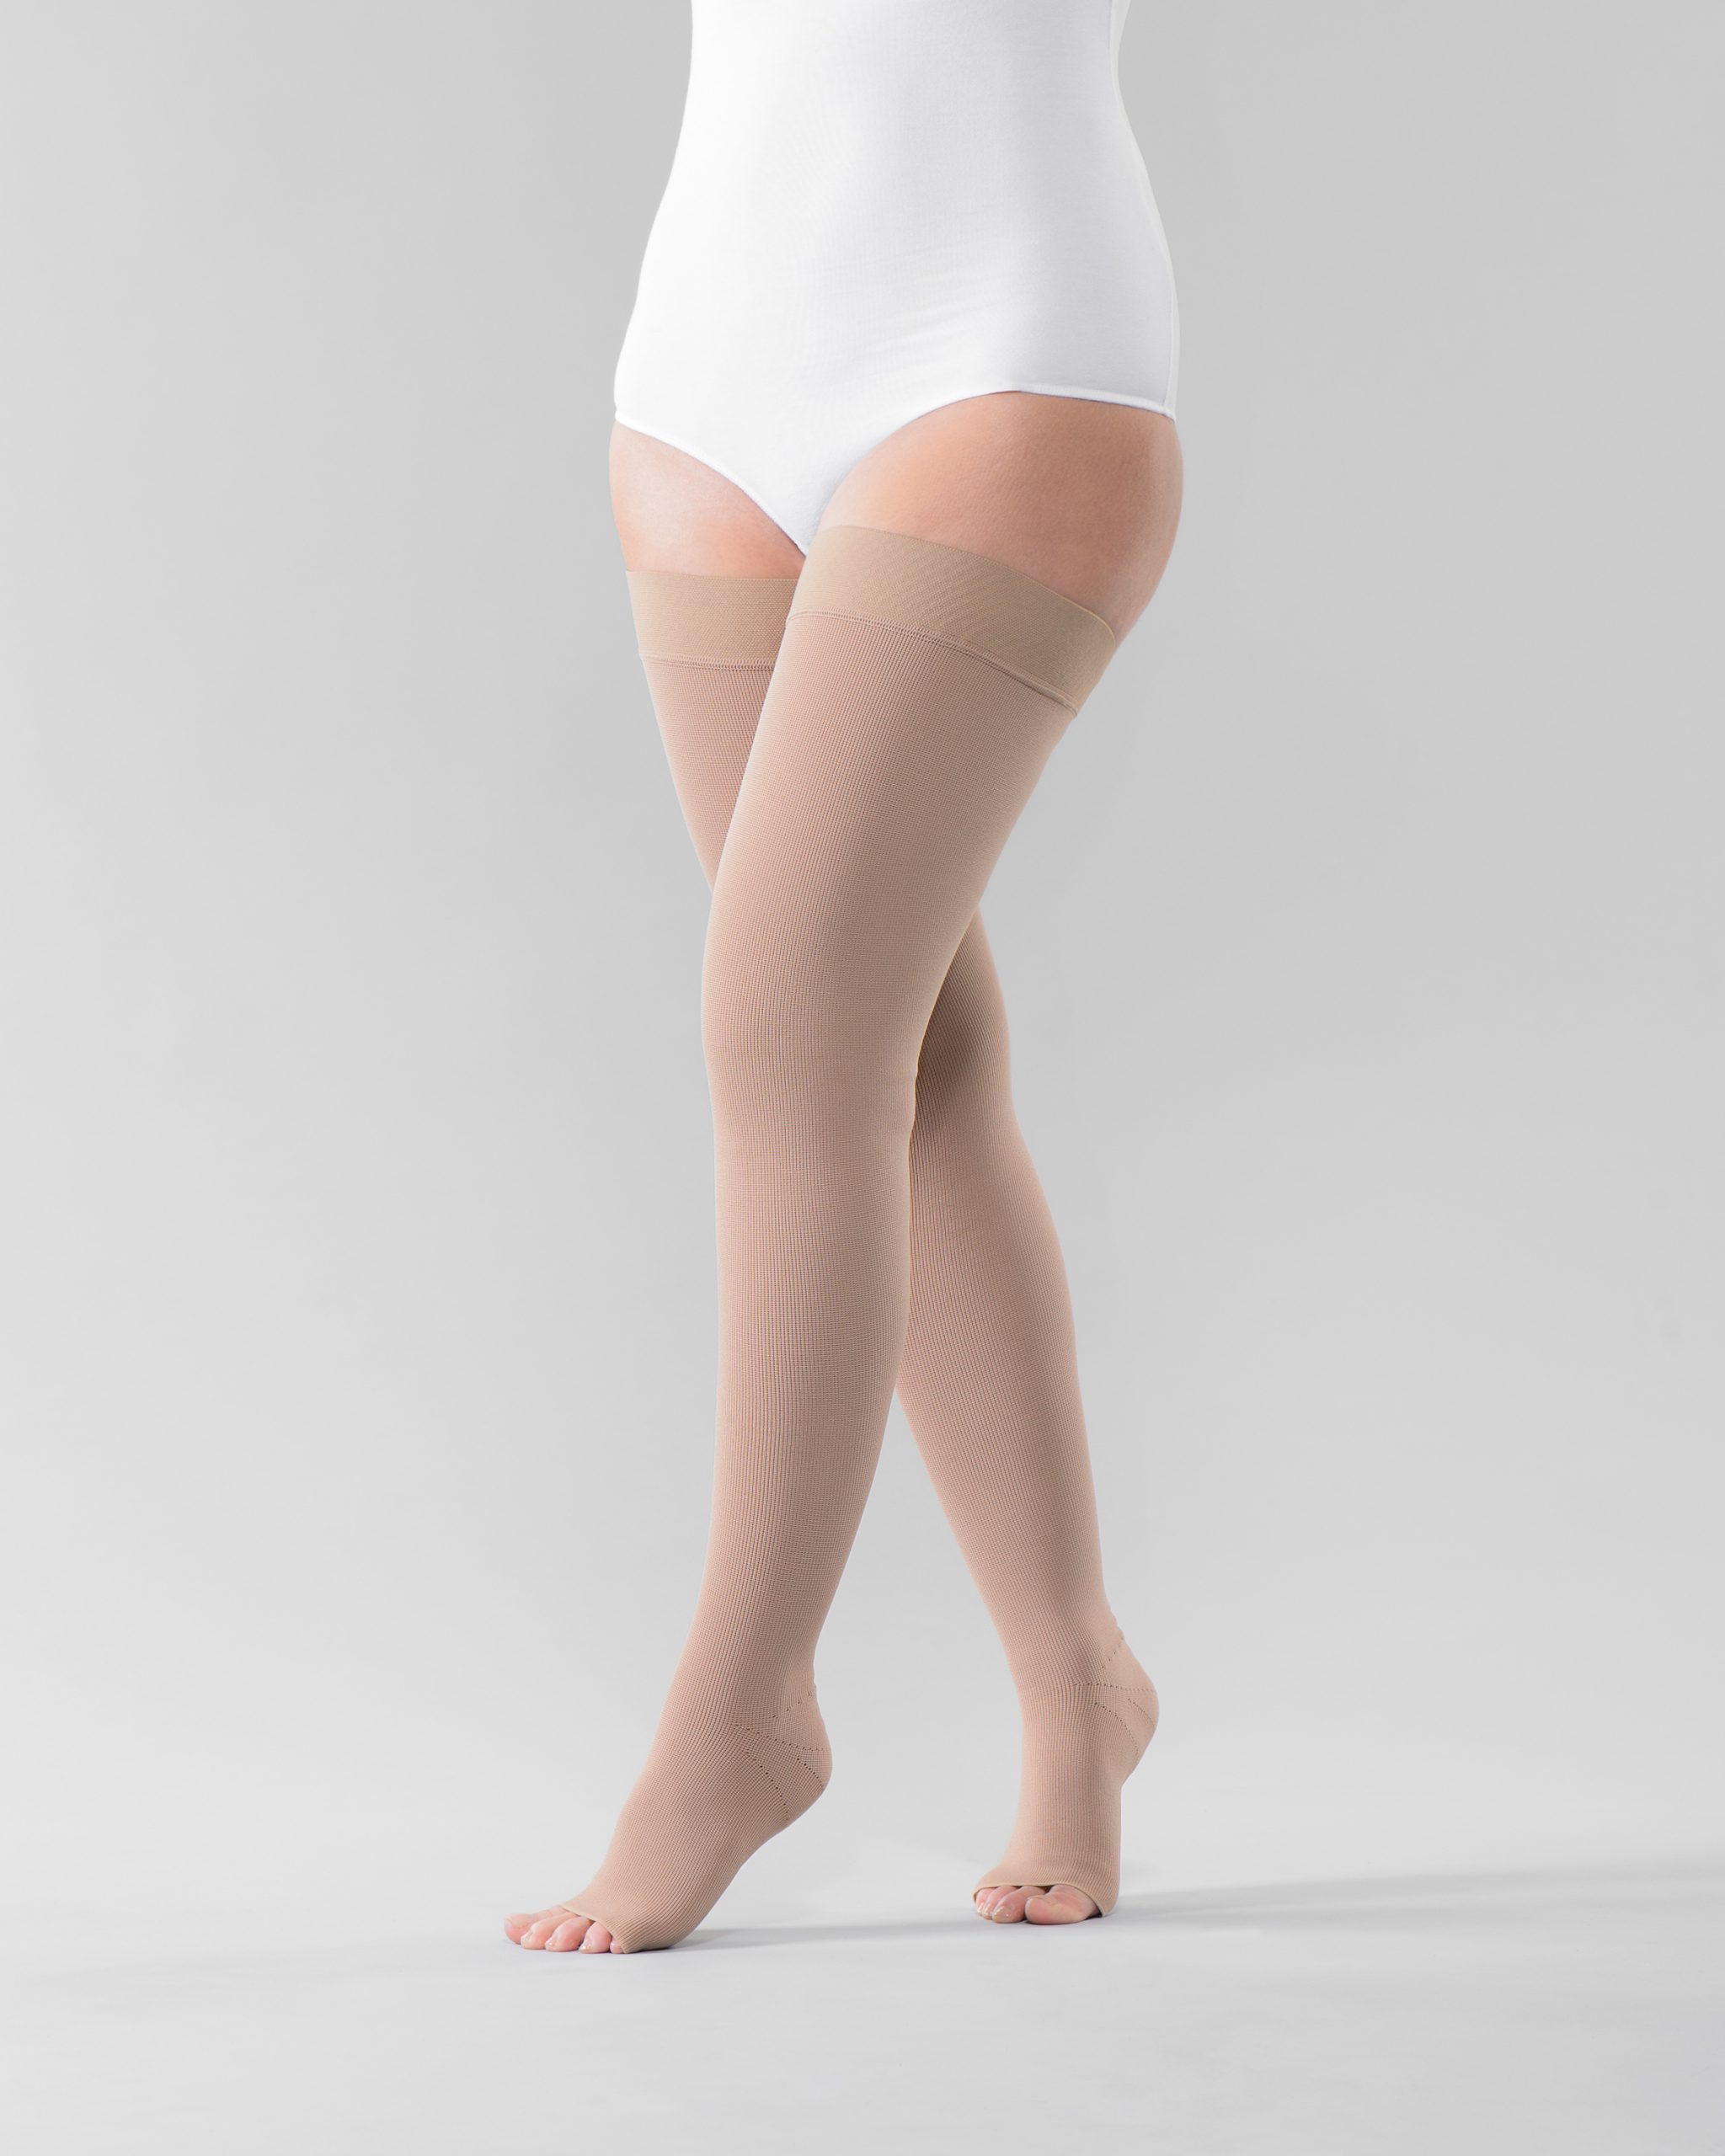 Round knit compression stockings for vein therapy